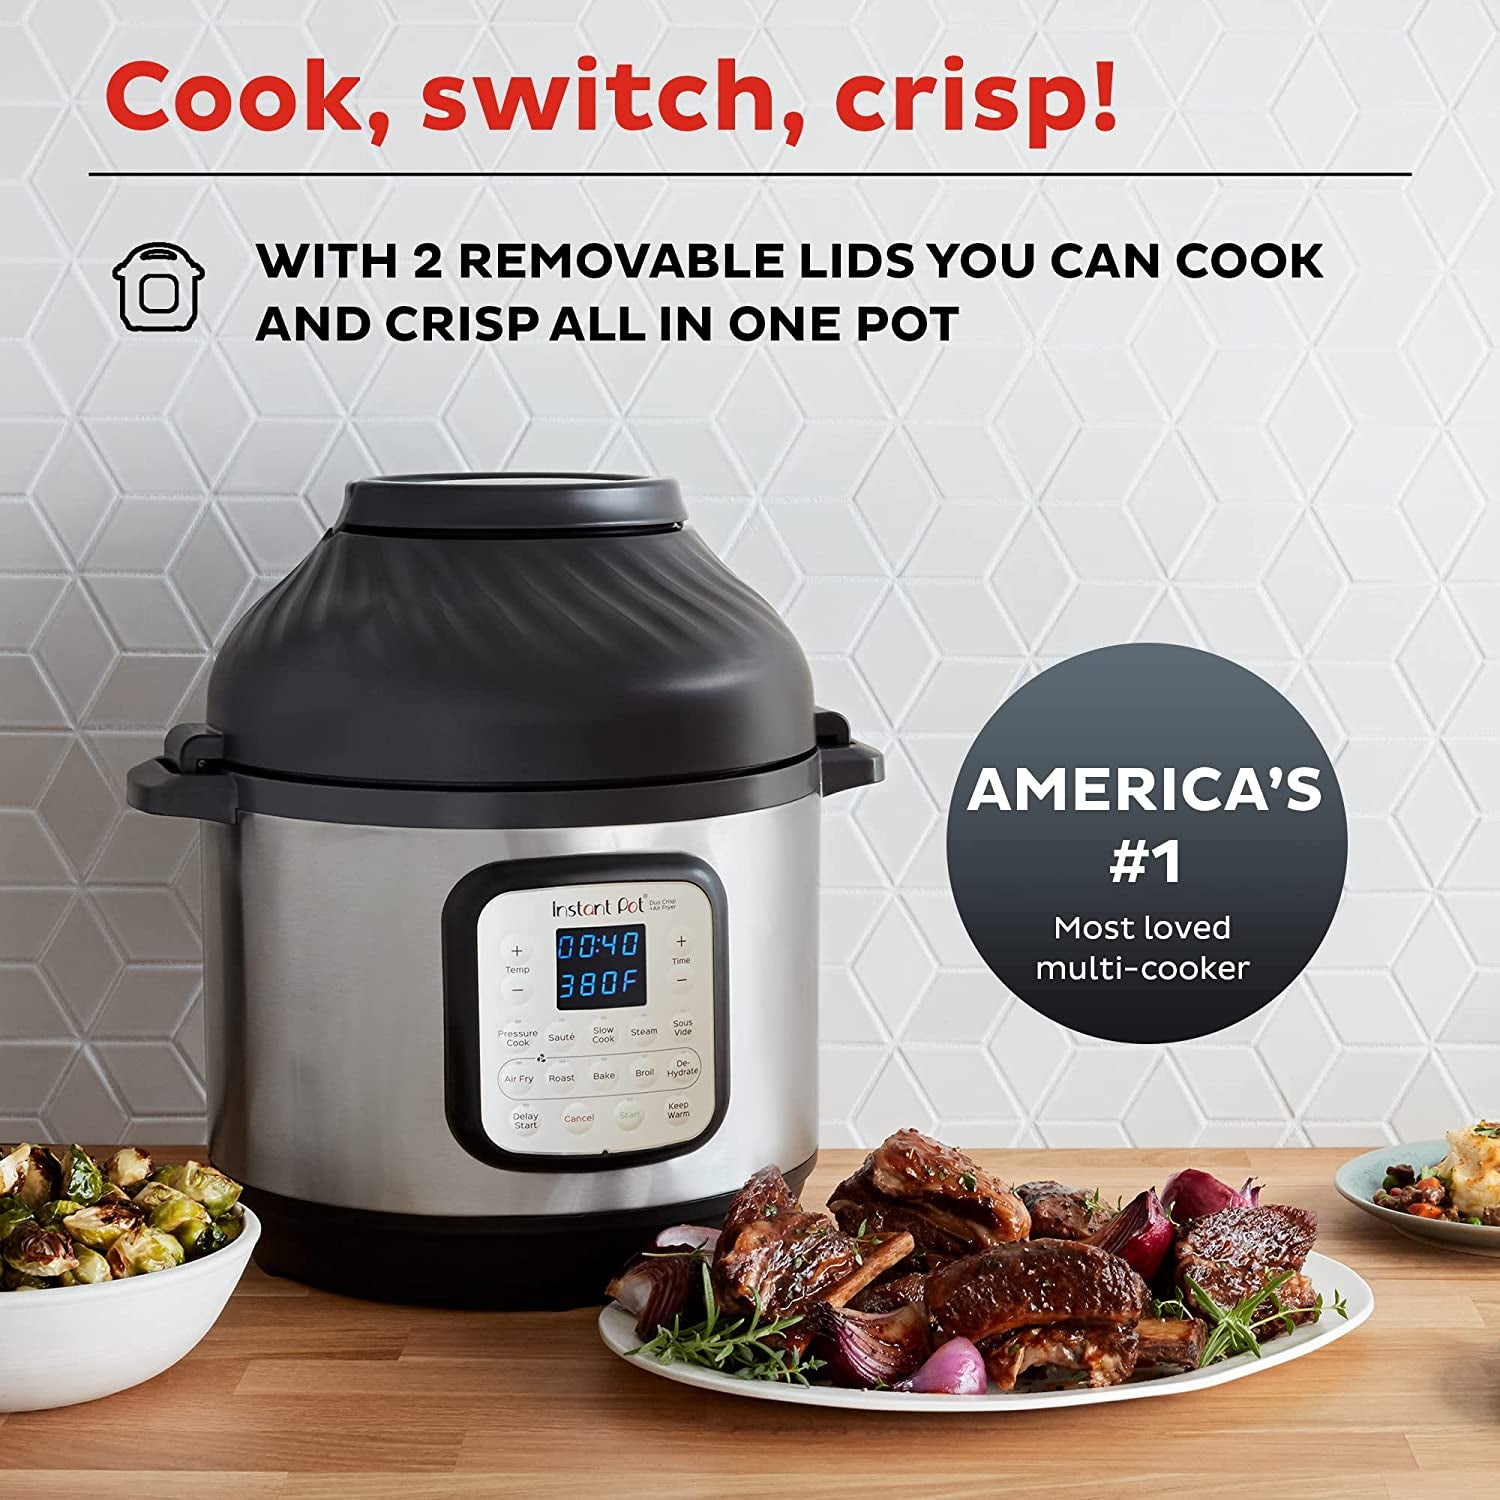 stainless steel instant pot with an air fryer attachment. cooked meat and vegetables in a plate sitting next to it